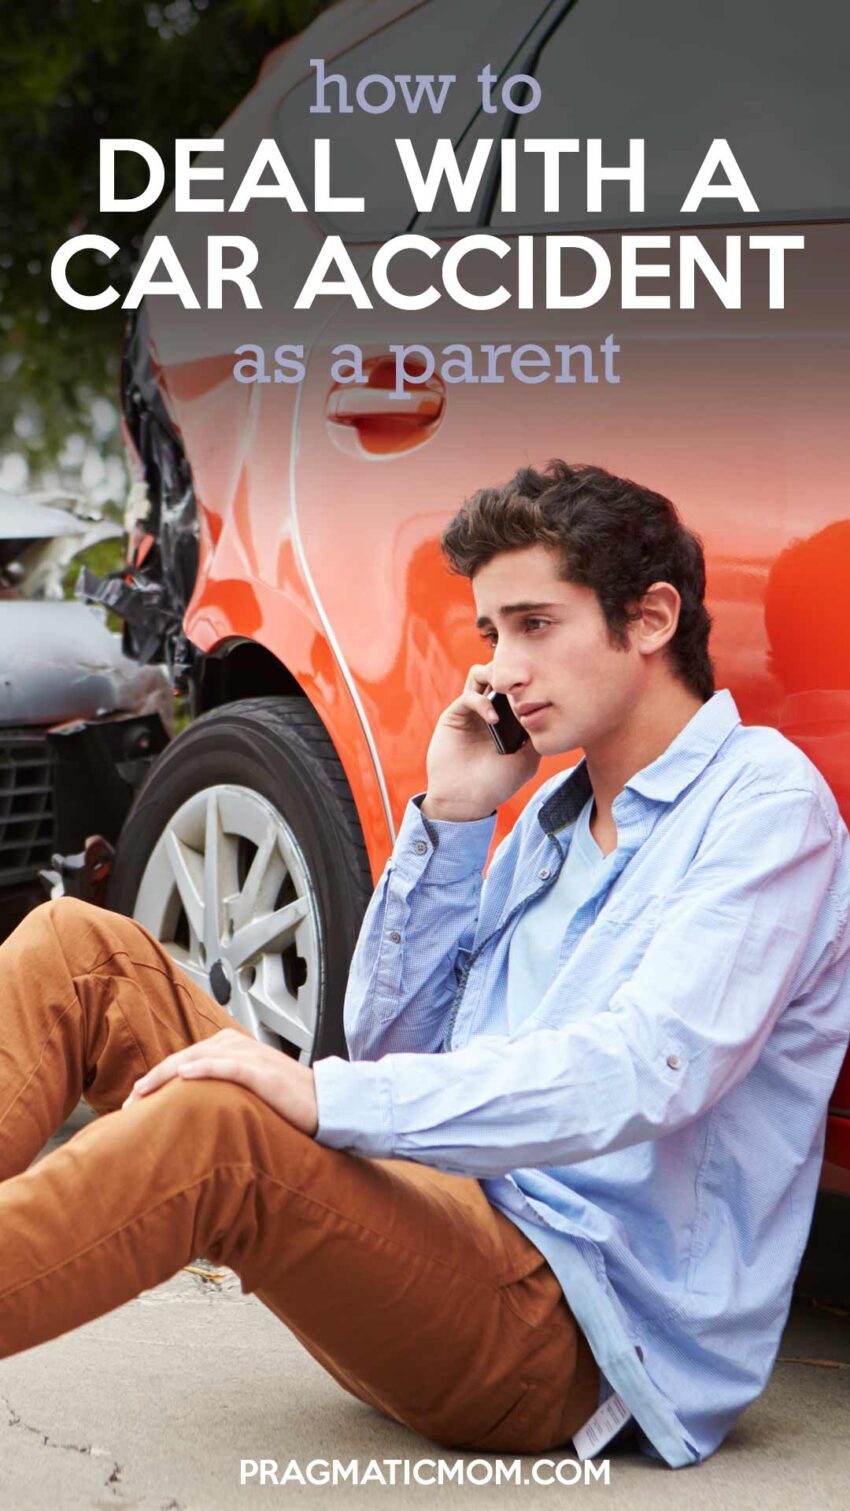 How to Deal with a Car Accident as a Parent